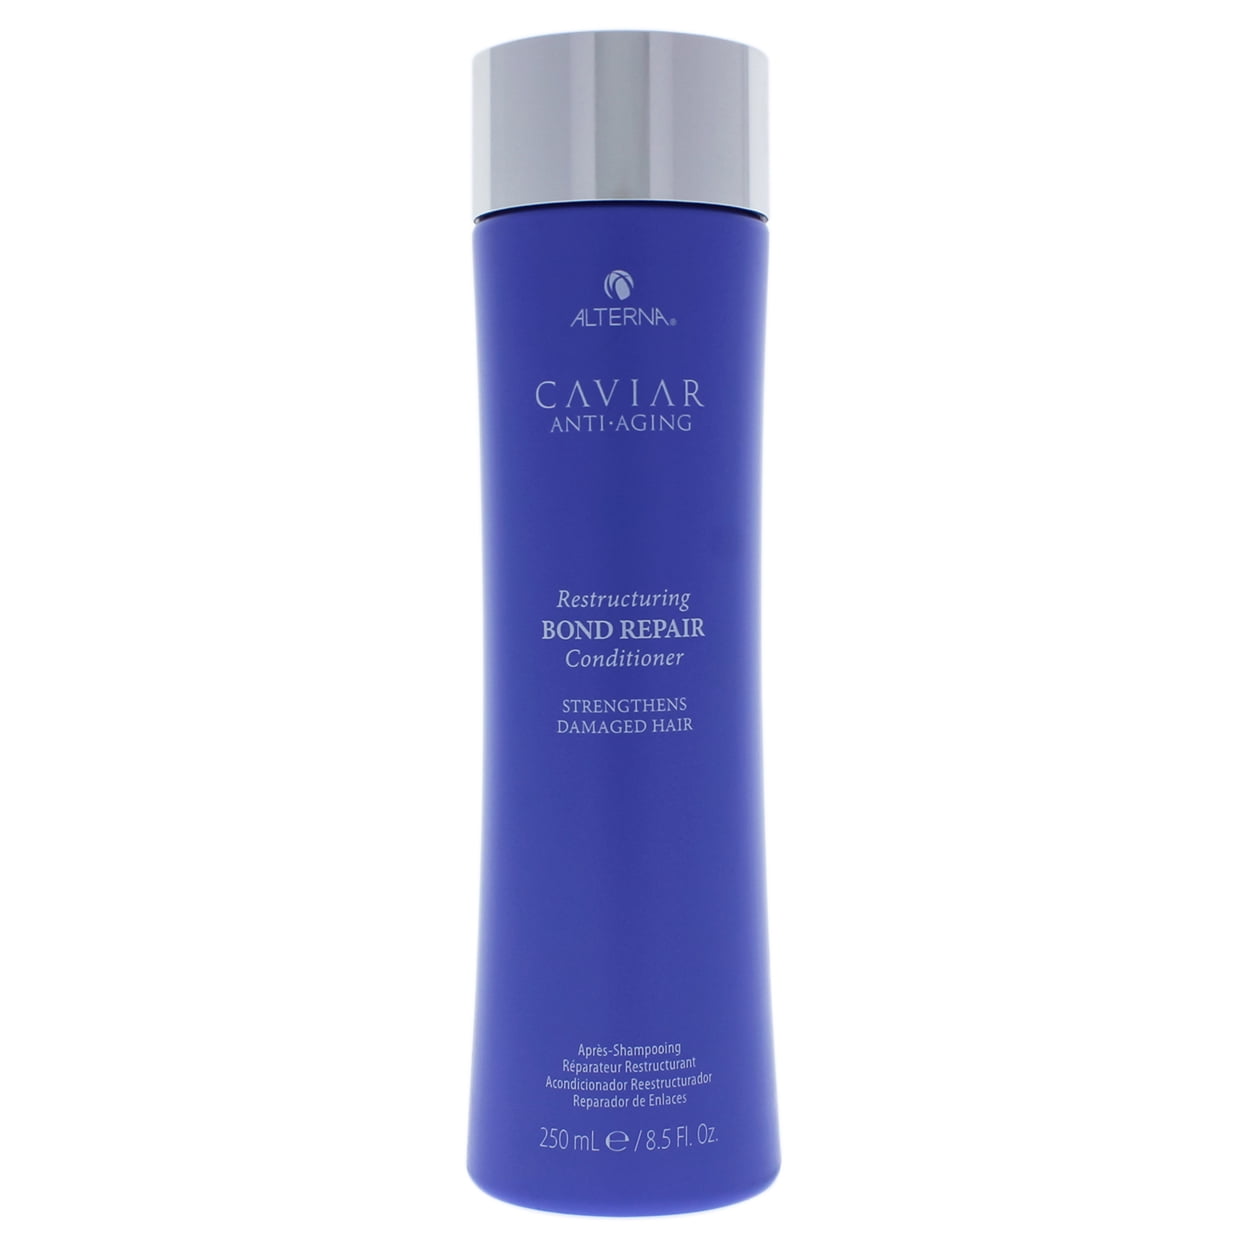 Caviar Anti-Aging Restructuring Bond Repair Conditioner by Alterna for ...